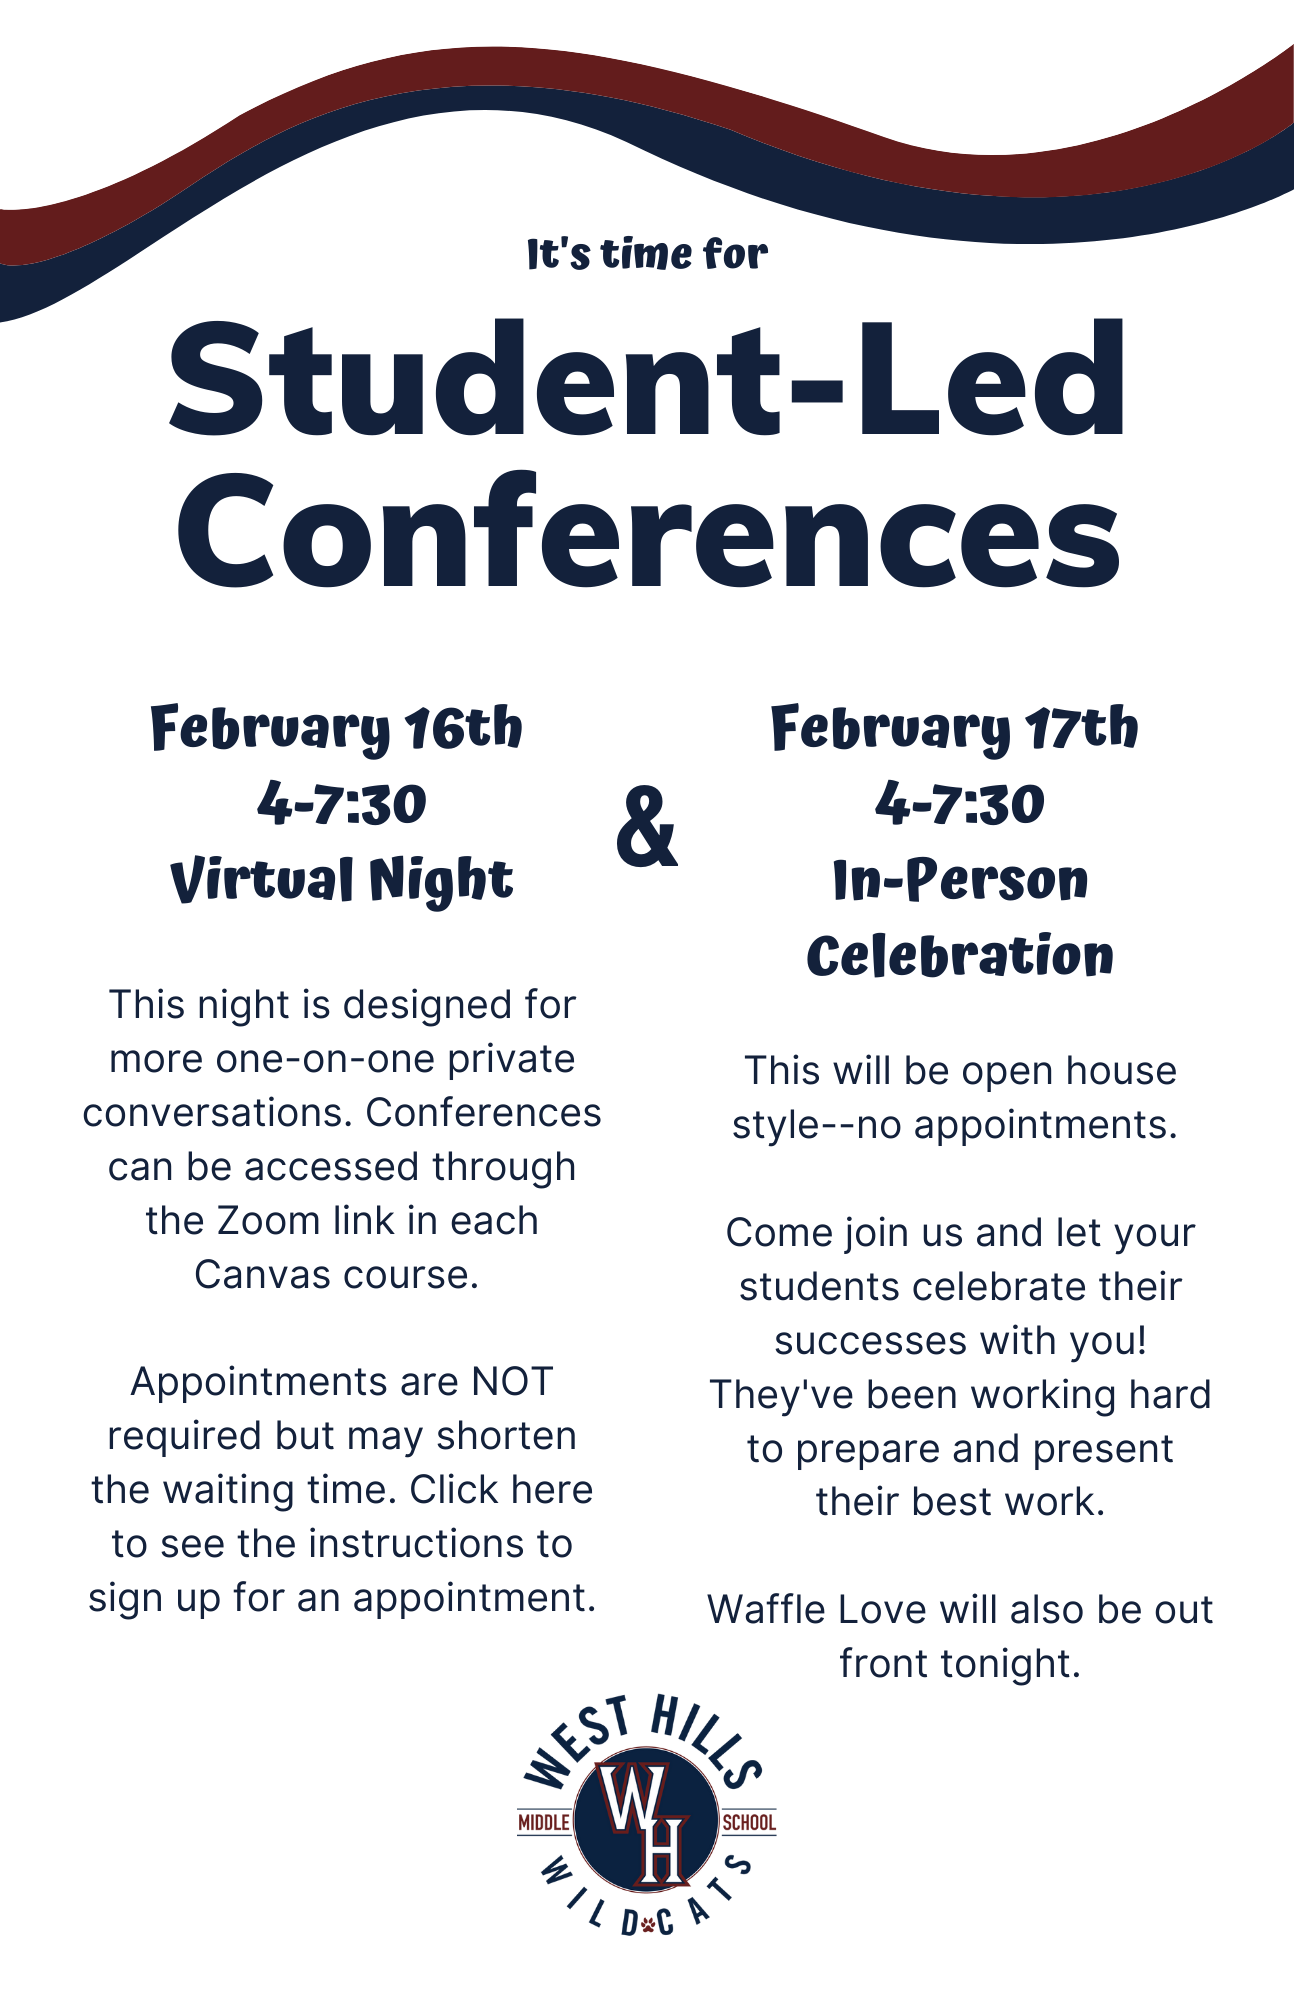 It's time for Student-Led Conferences!